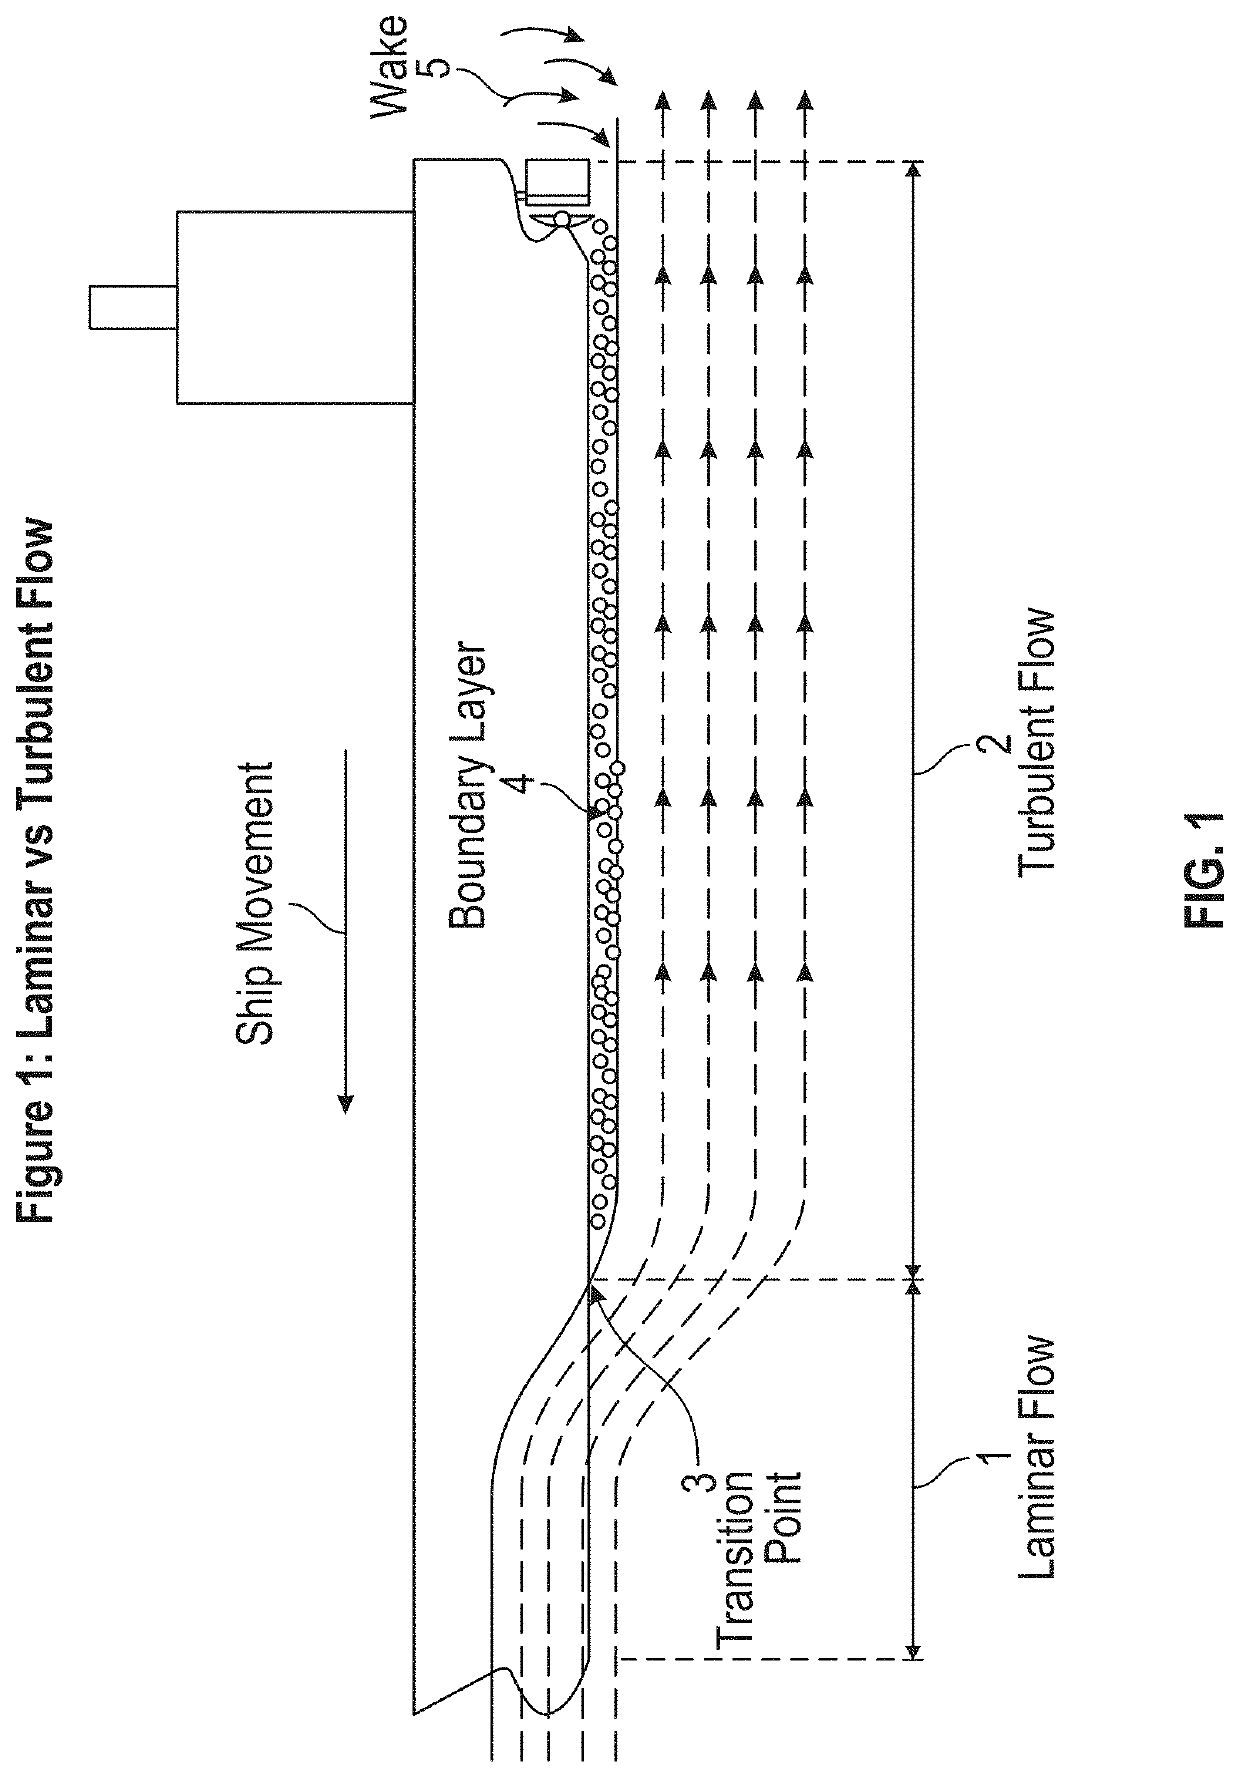 Methods, systems, and apparatuses to facilitate providing and sustaining a laminar flow of a fluid across a vessel